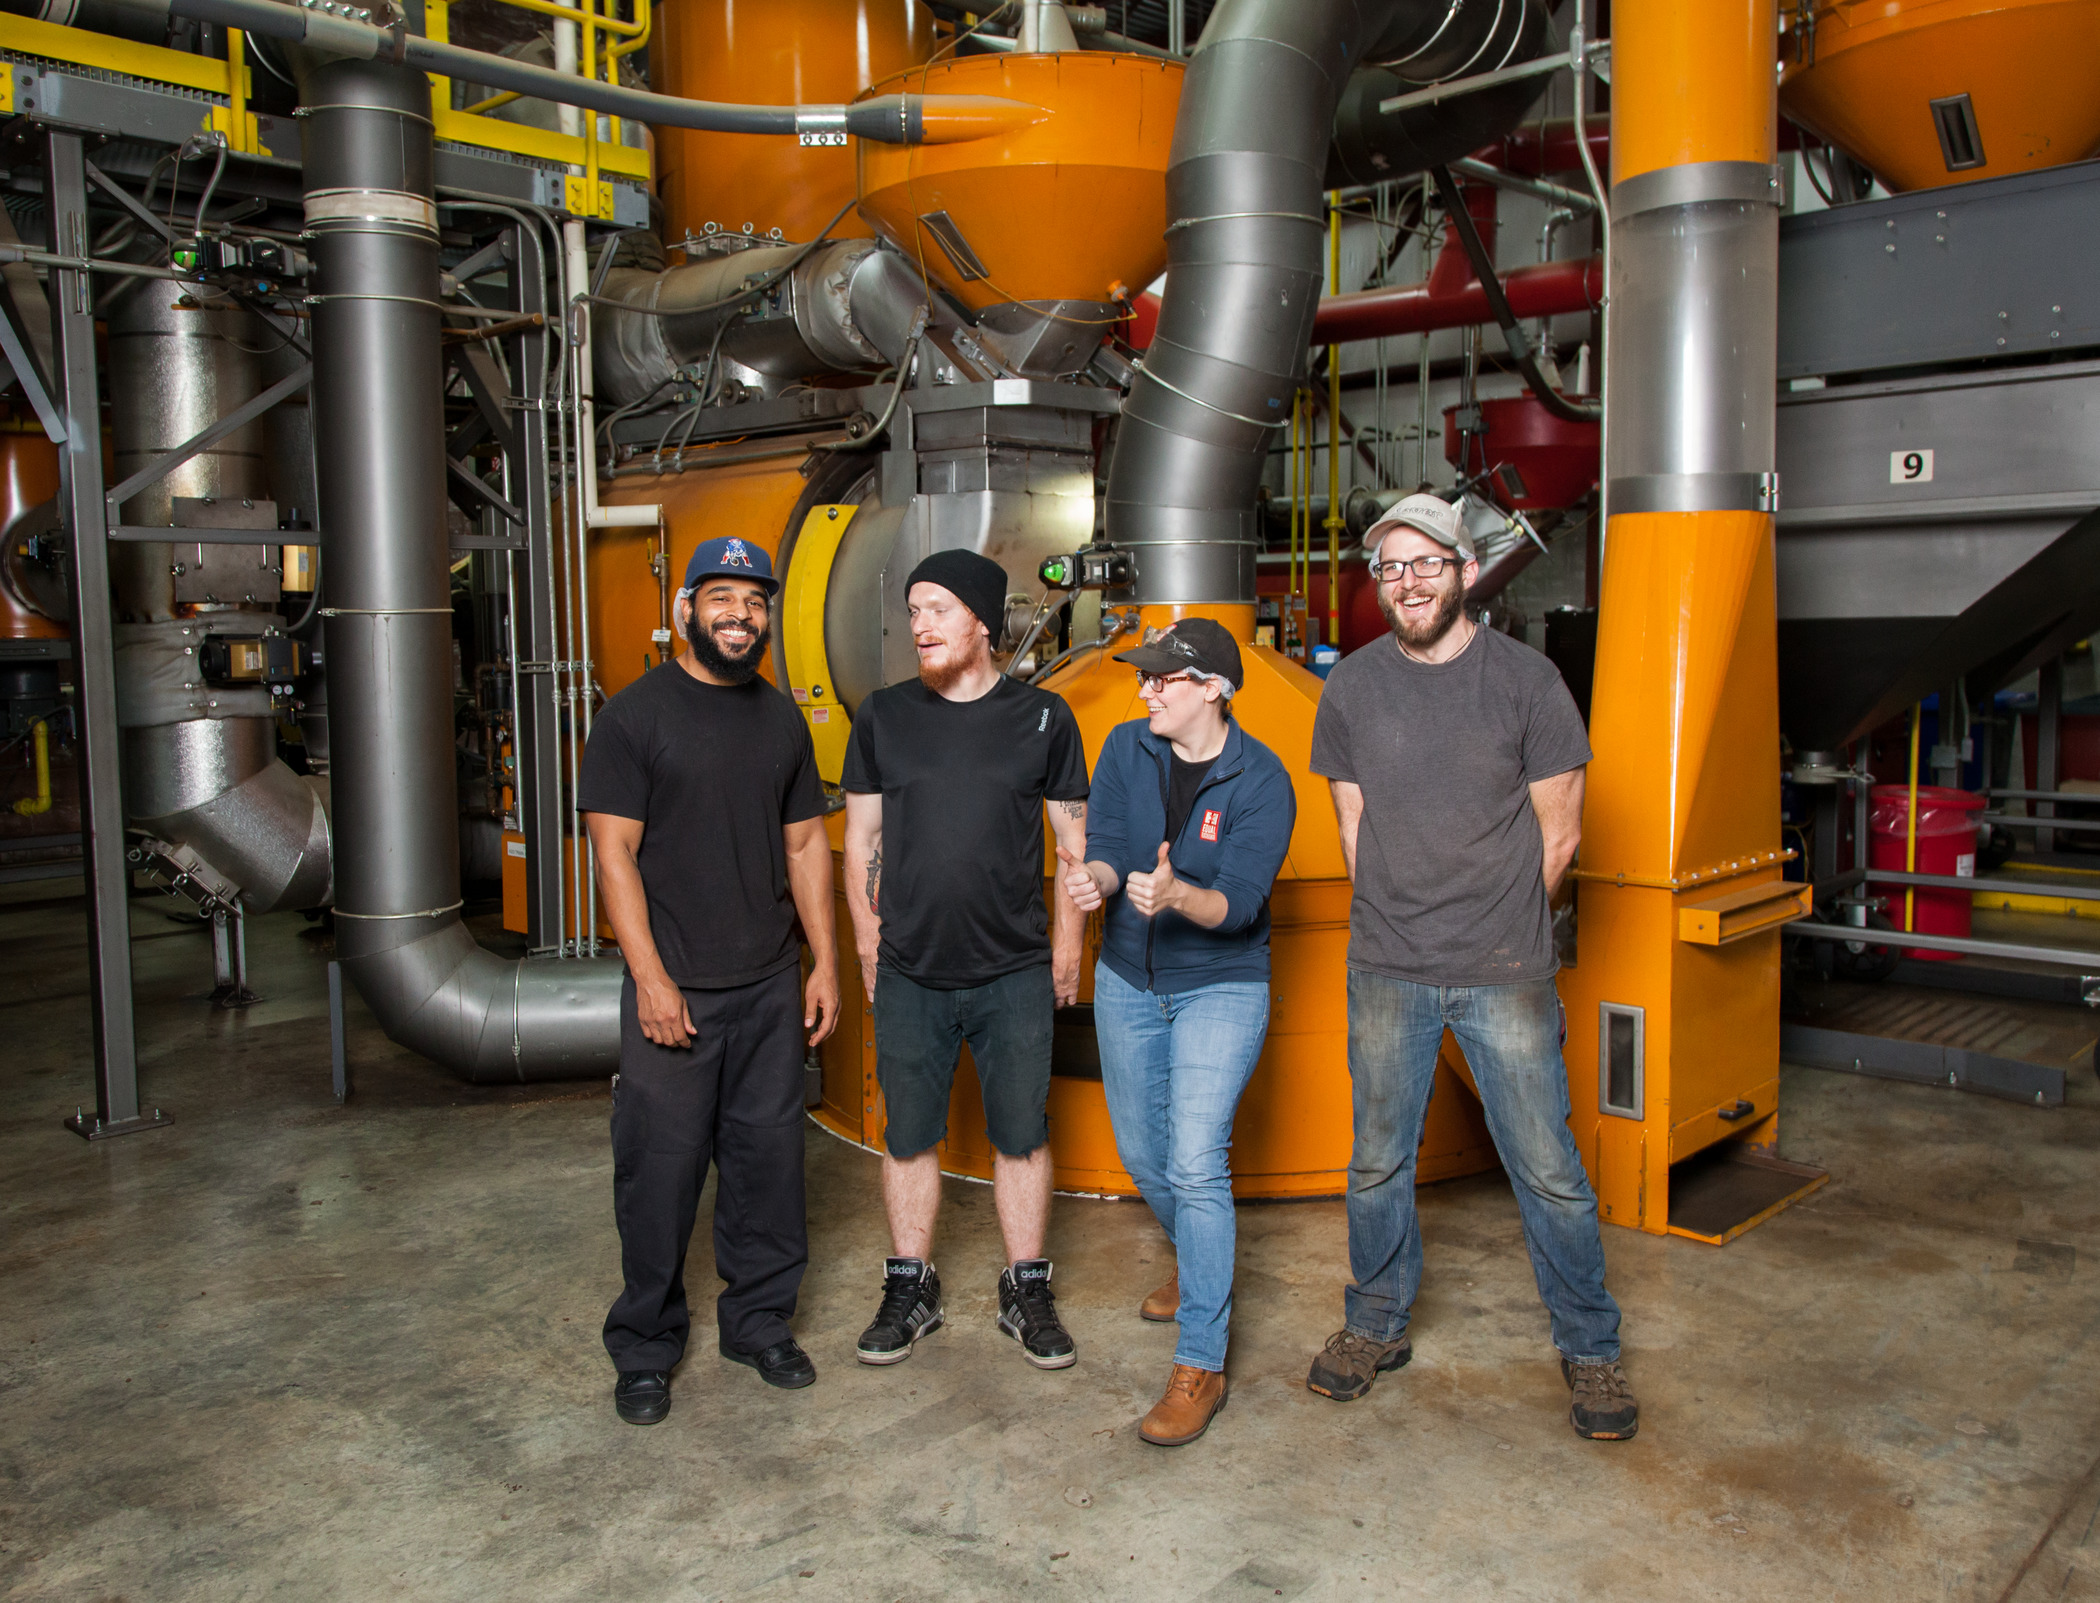 Four men and women stand in front of coffee roasing equipment